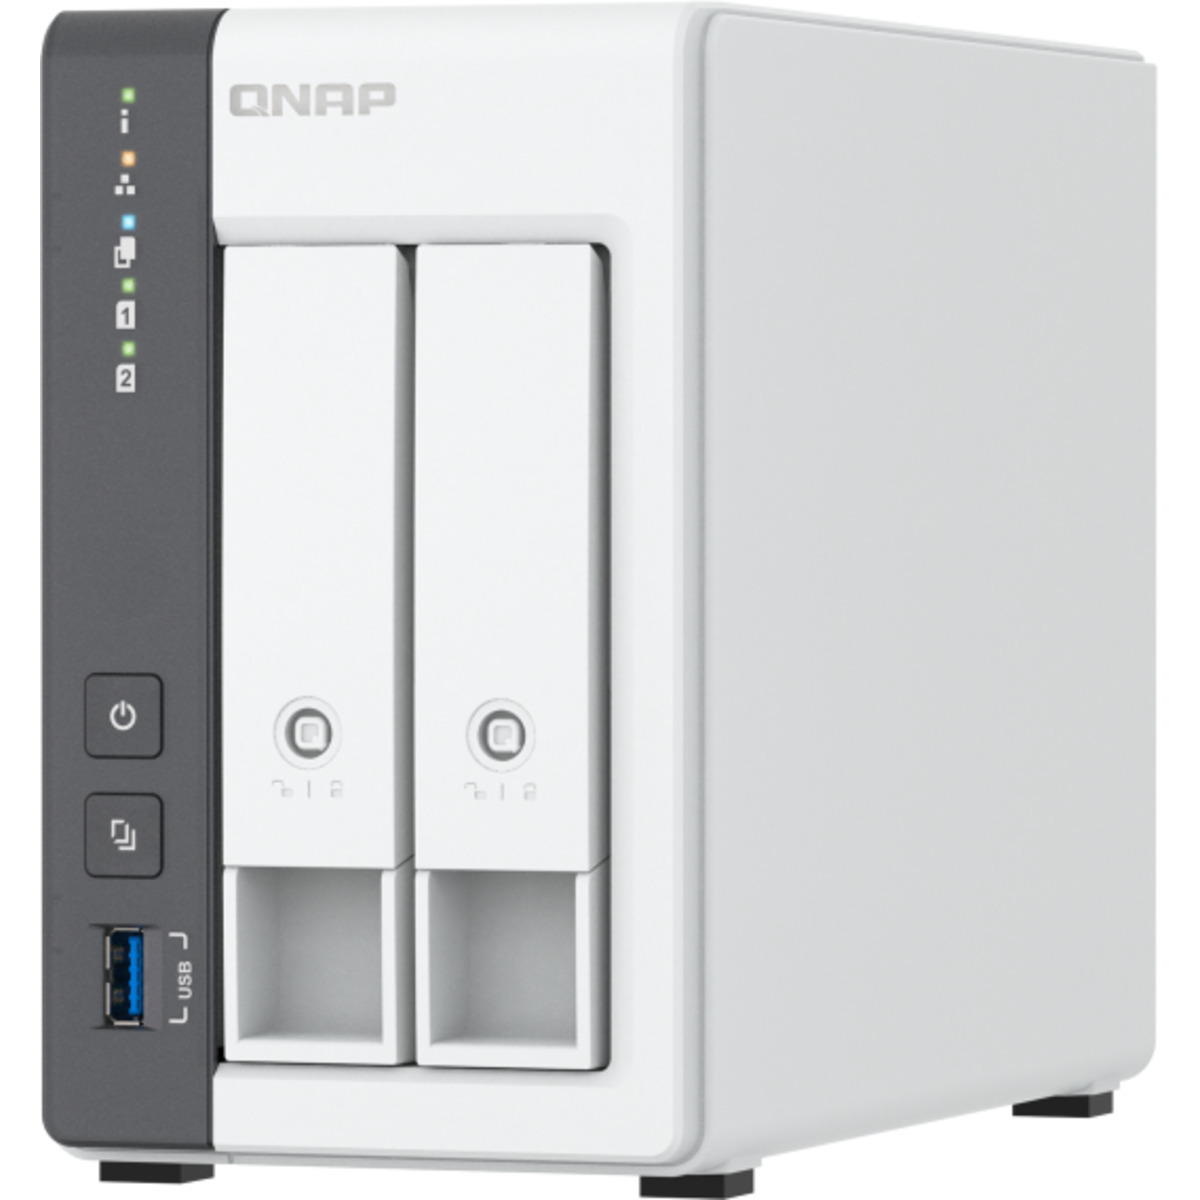 QNAP TS-216G 16tb 2-Bay Desktop Personal / Basic Home / Small Office NAS - Network Attached Storage Device 1x16tb Western Digital Red Pro WD161KFGX 3.5 7200rpm SATA 6Gb/s HDD NAS Class Drives Installed - Burn-In Tested TS-216G